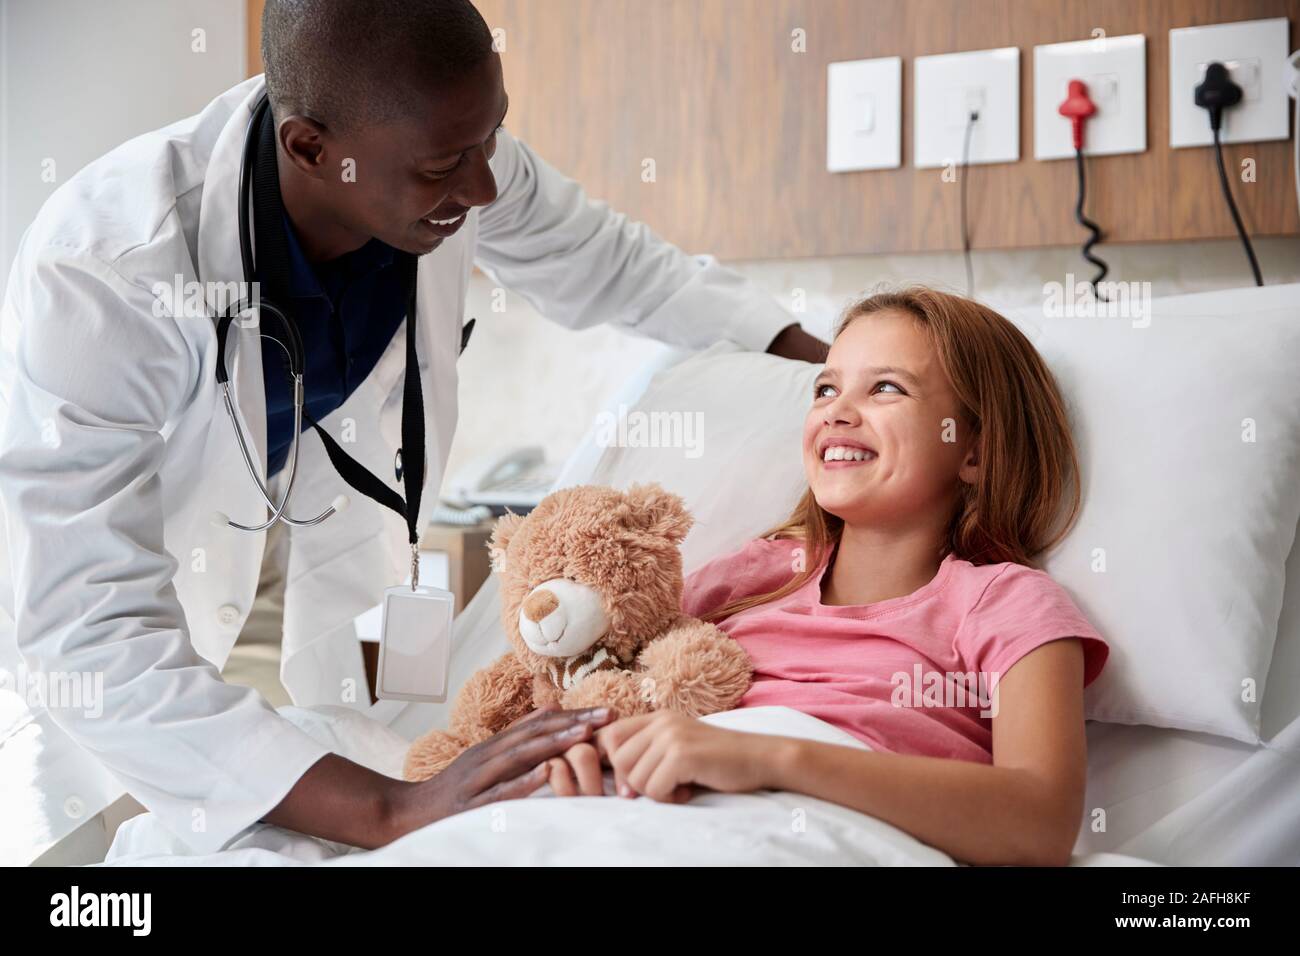 Male Doctor Visiting Girl Lying In Hospital Bed Hugging Teddy Bear Stock Photo